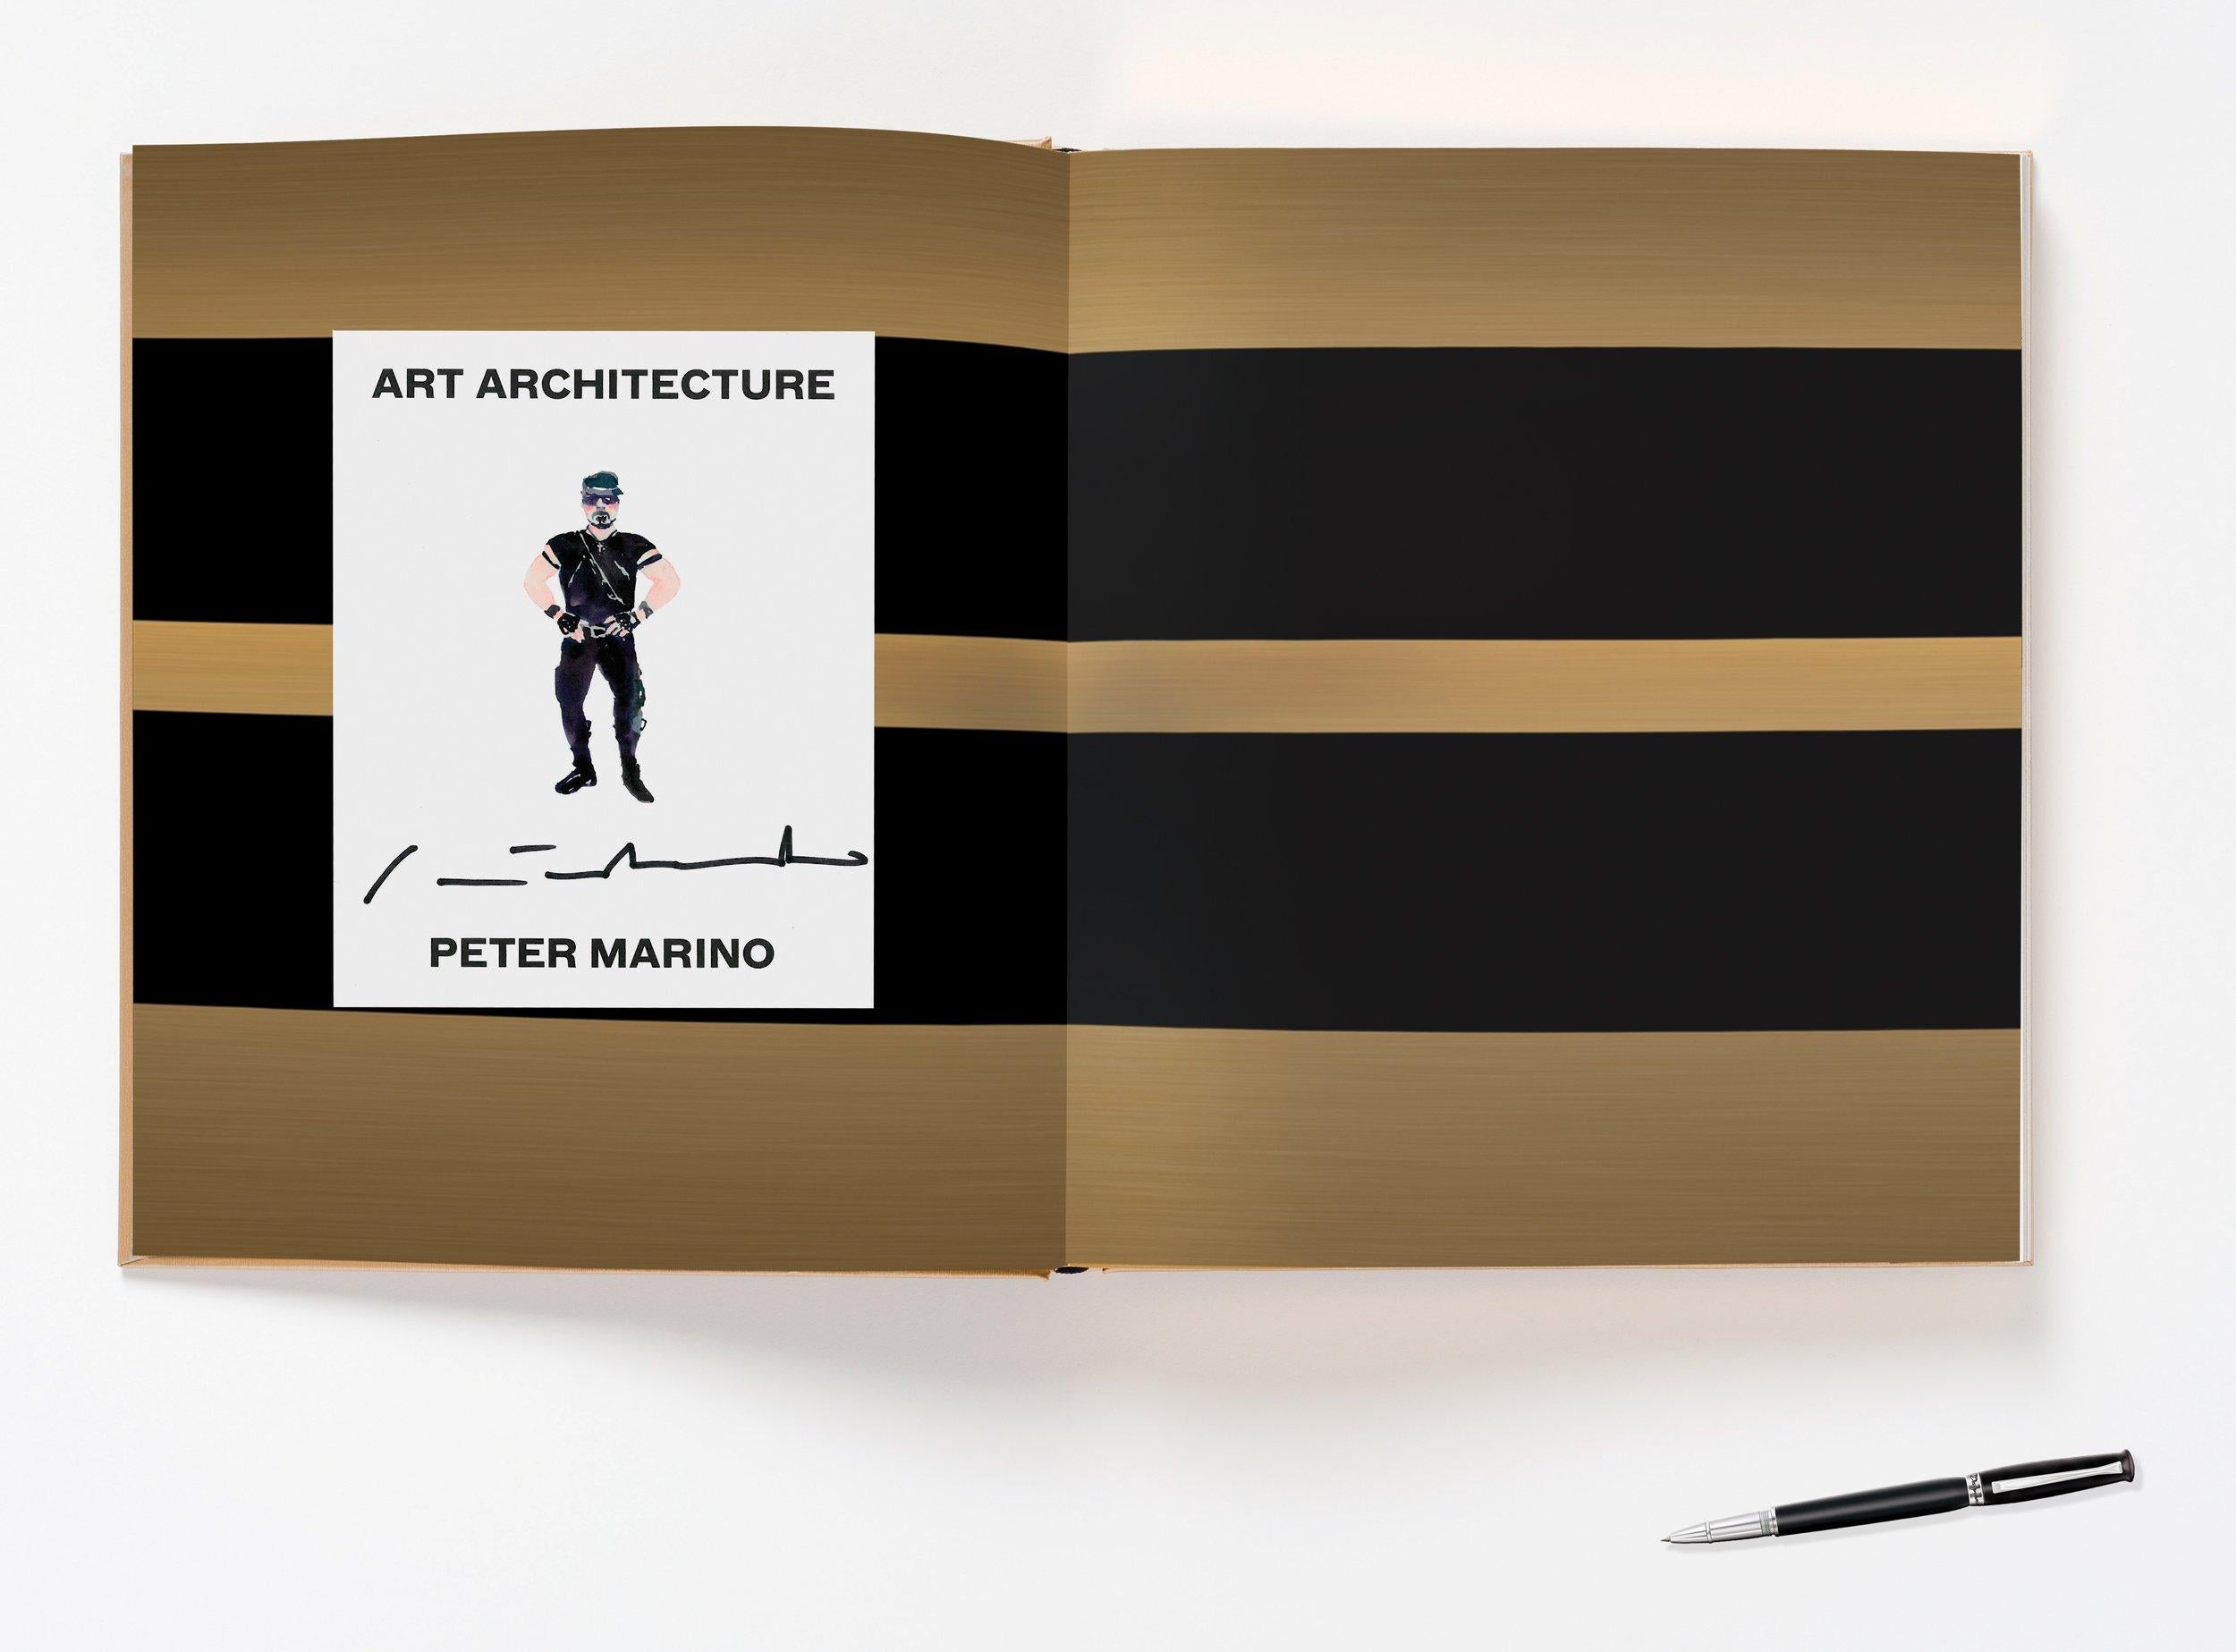 Modern In Stock in Los Angeles, Peter Marino Art Architecture, Luxury Edition